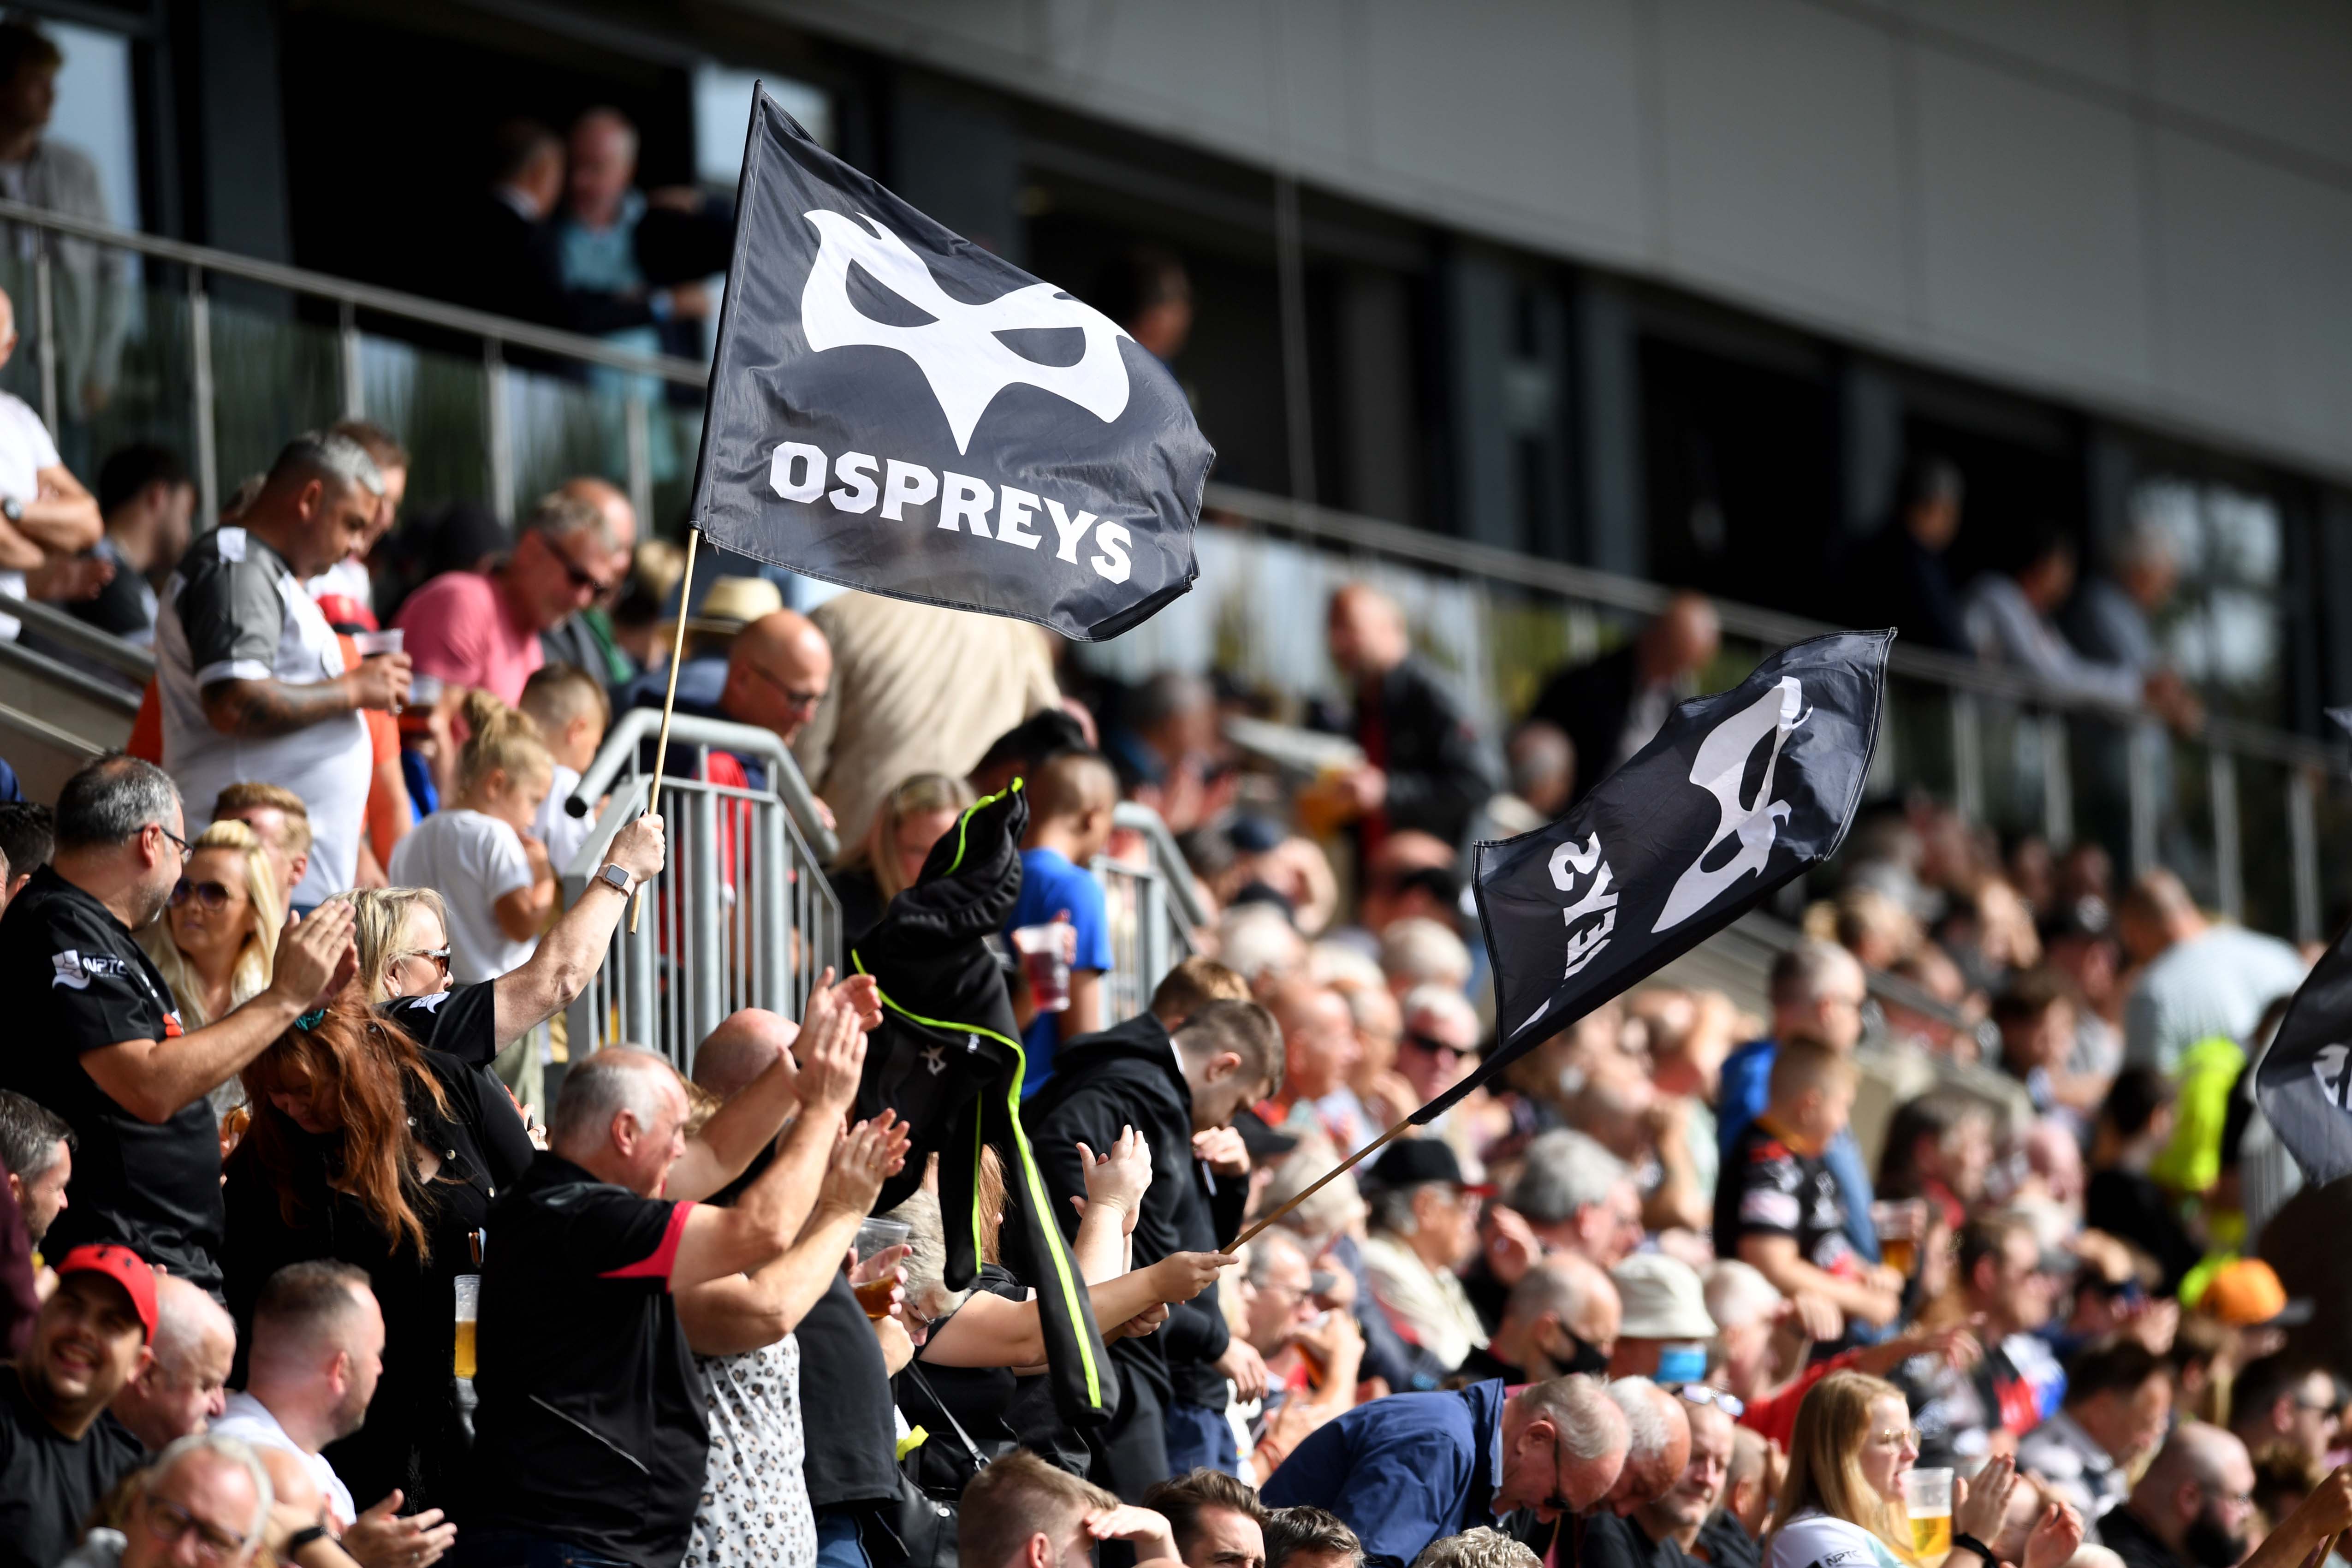 Ospreys supporters